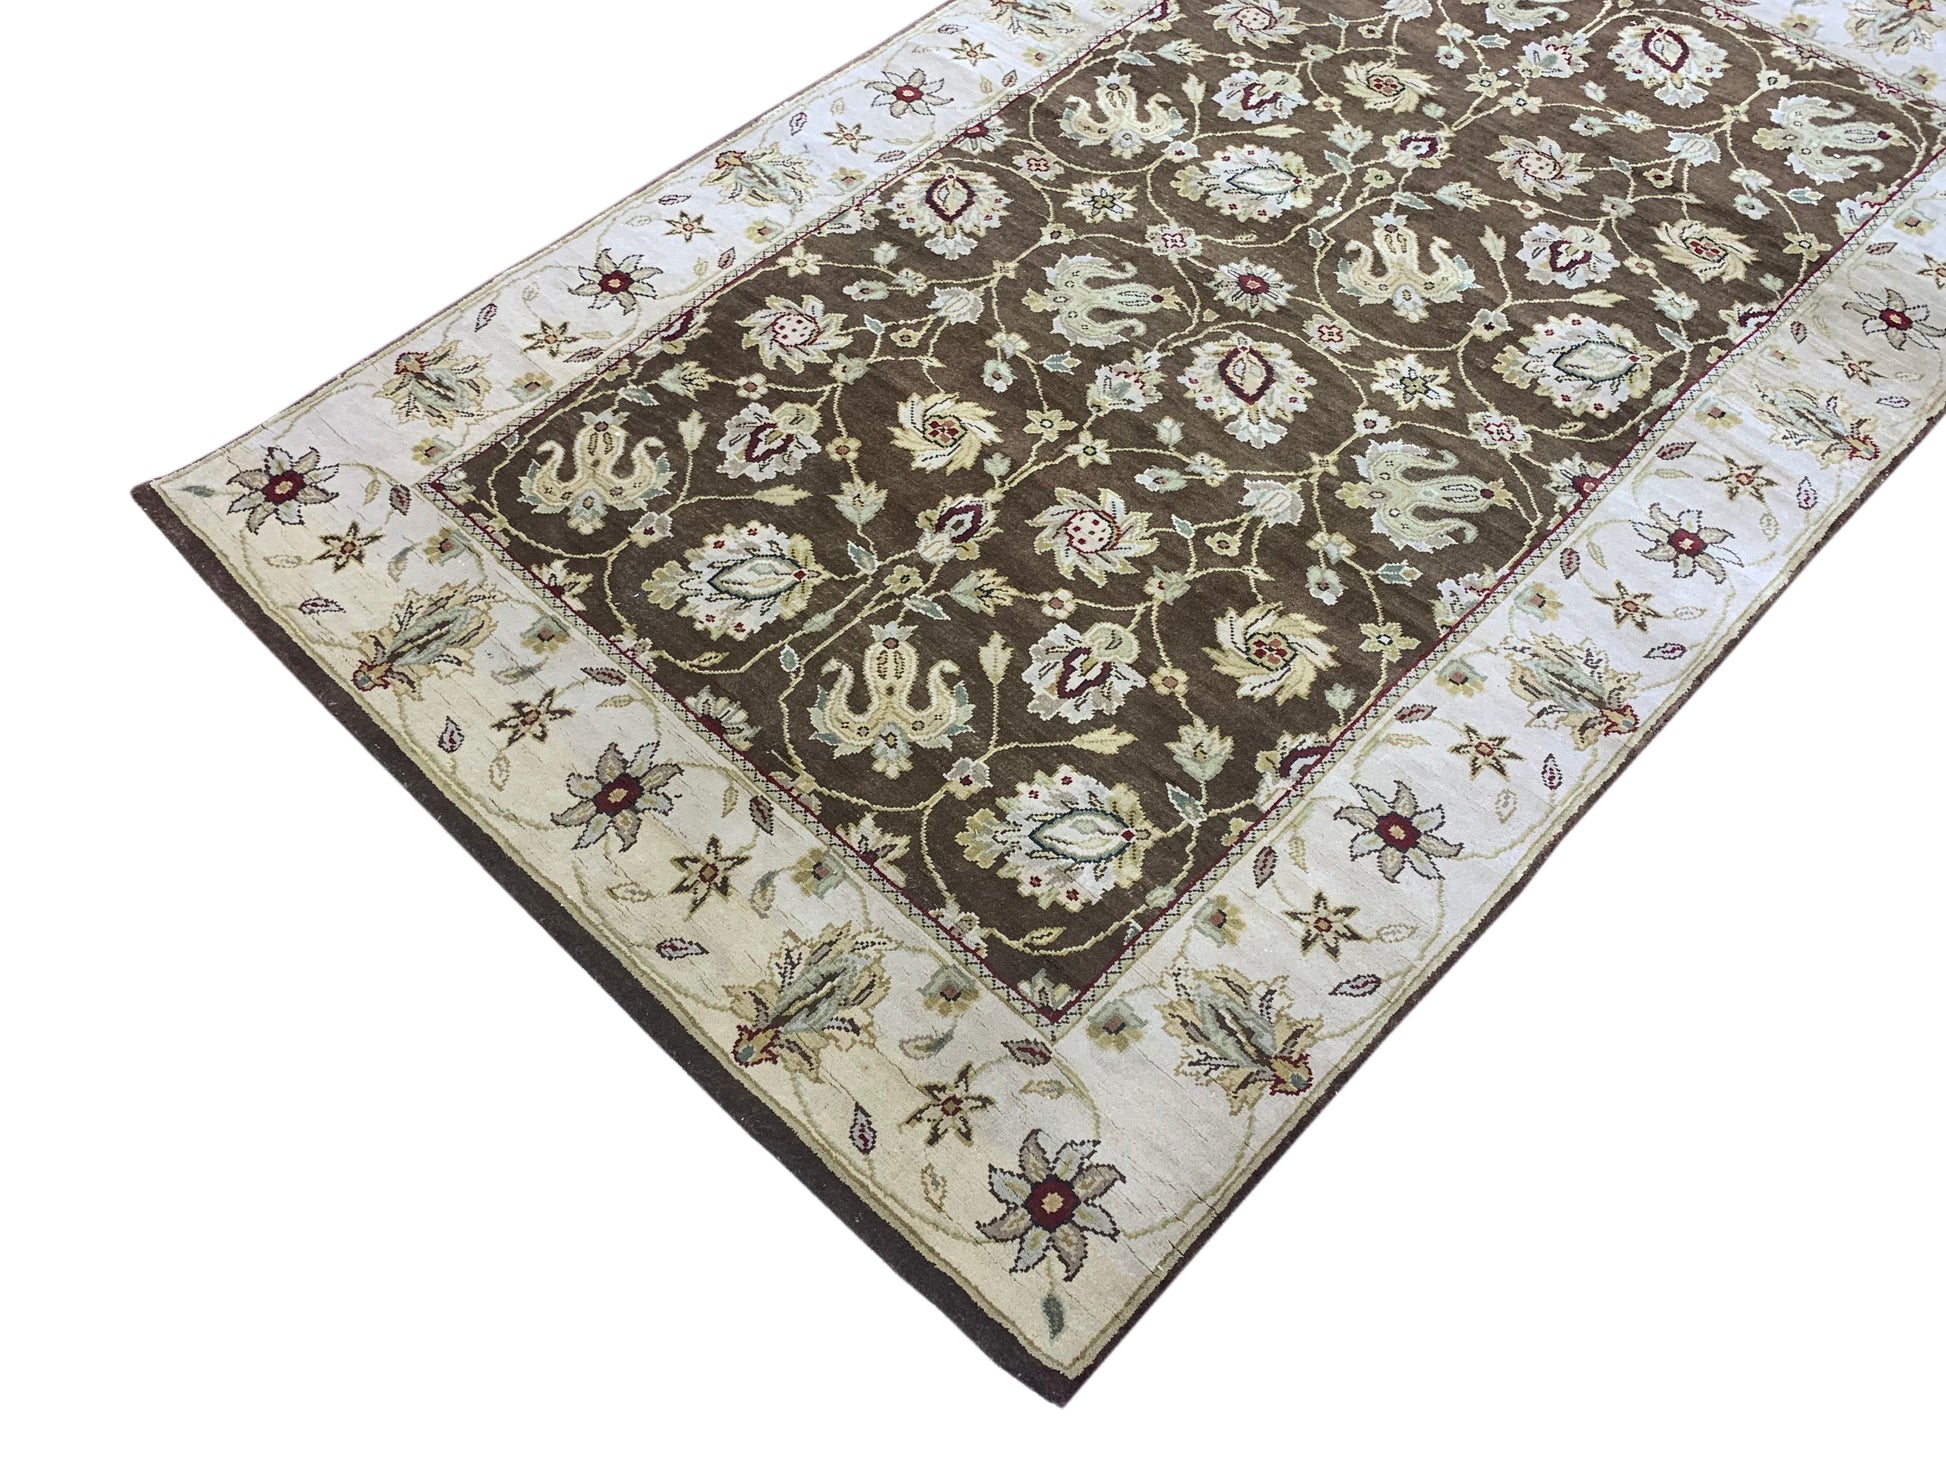 Get trendy with Ivory Brown Silk Contemporary Luxurious Handknotted Area Rug 3.0x5.0ft 92x152Cms - Contemporary Rugs available at Jaipur Oriental Rugs. Grab yours for $1220.00 today!